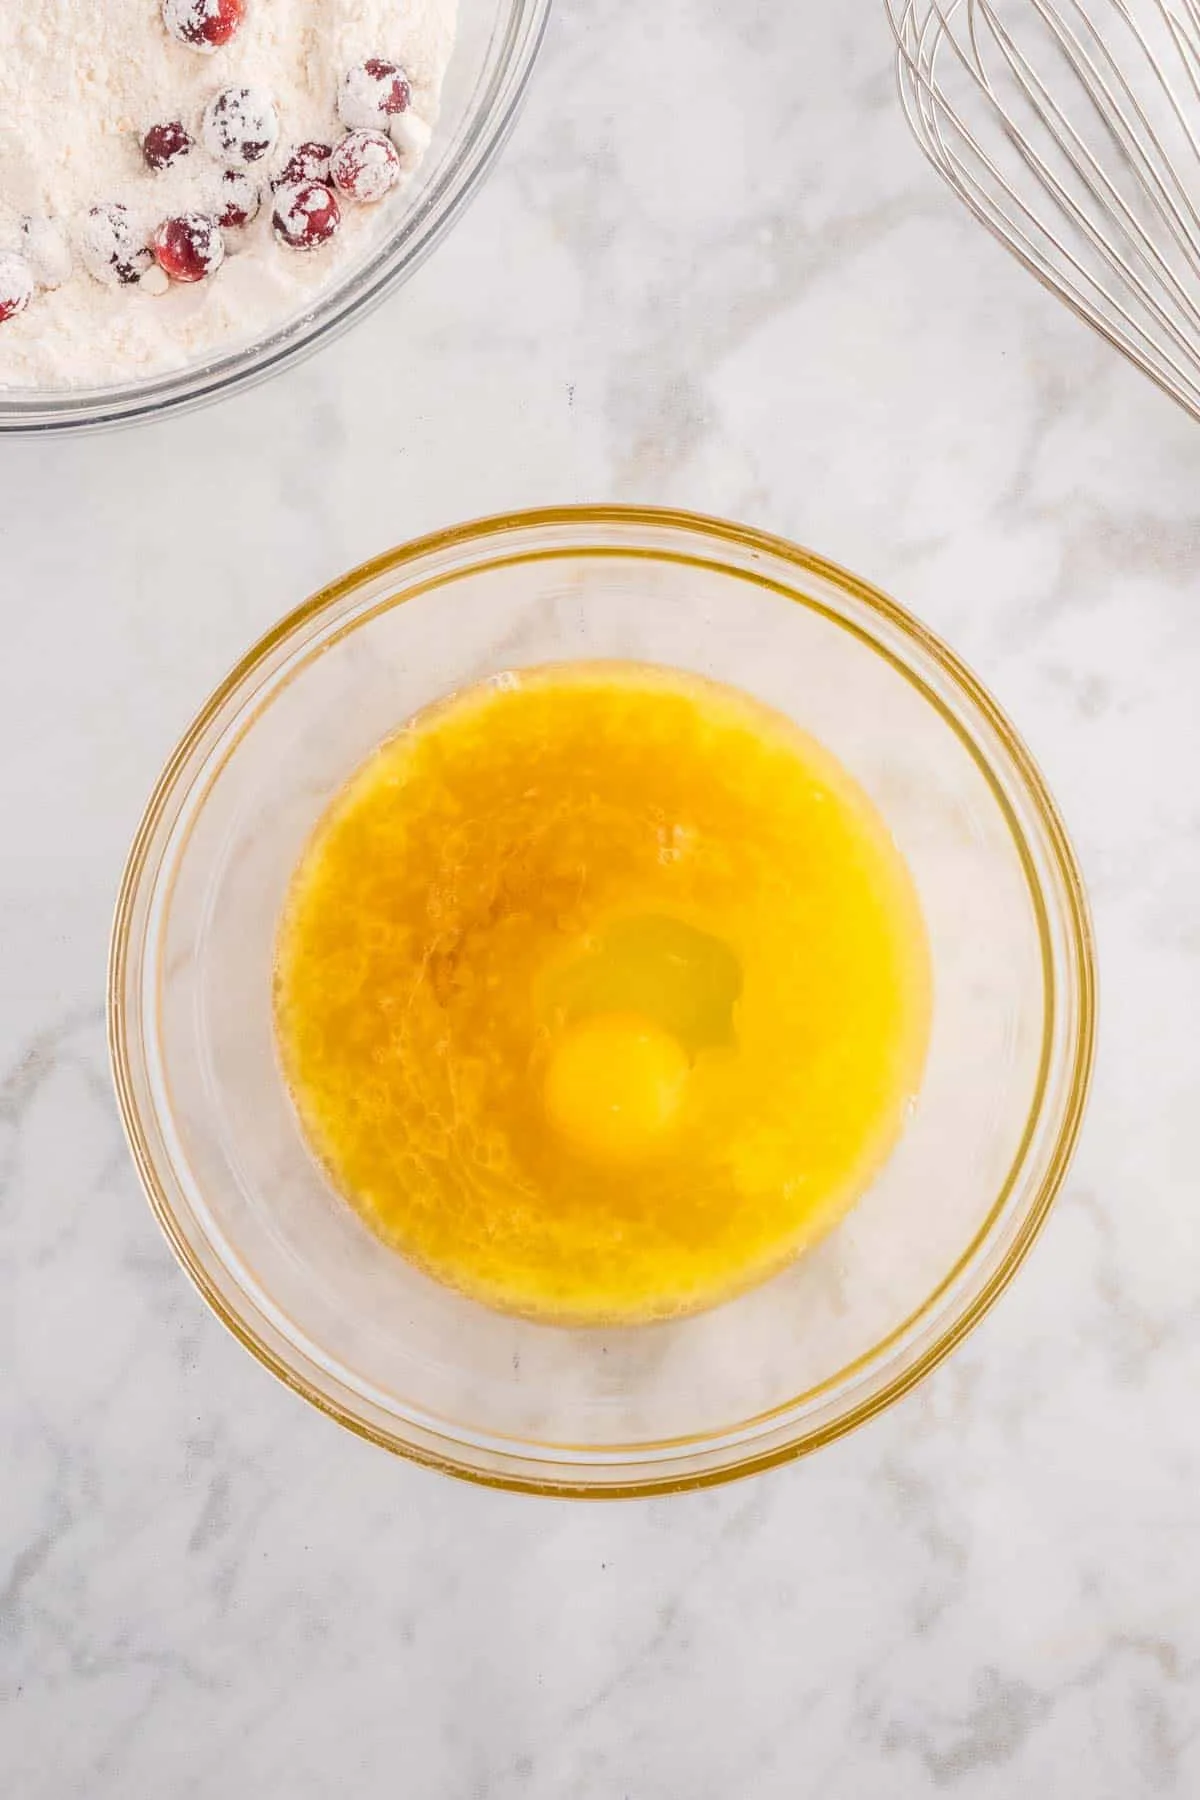 melted butter, orange juice, vanilla extract and an egg in a mixing bowl